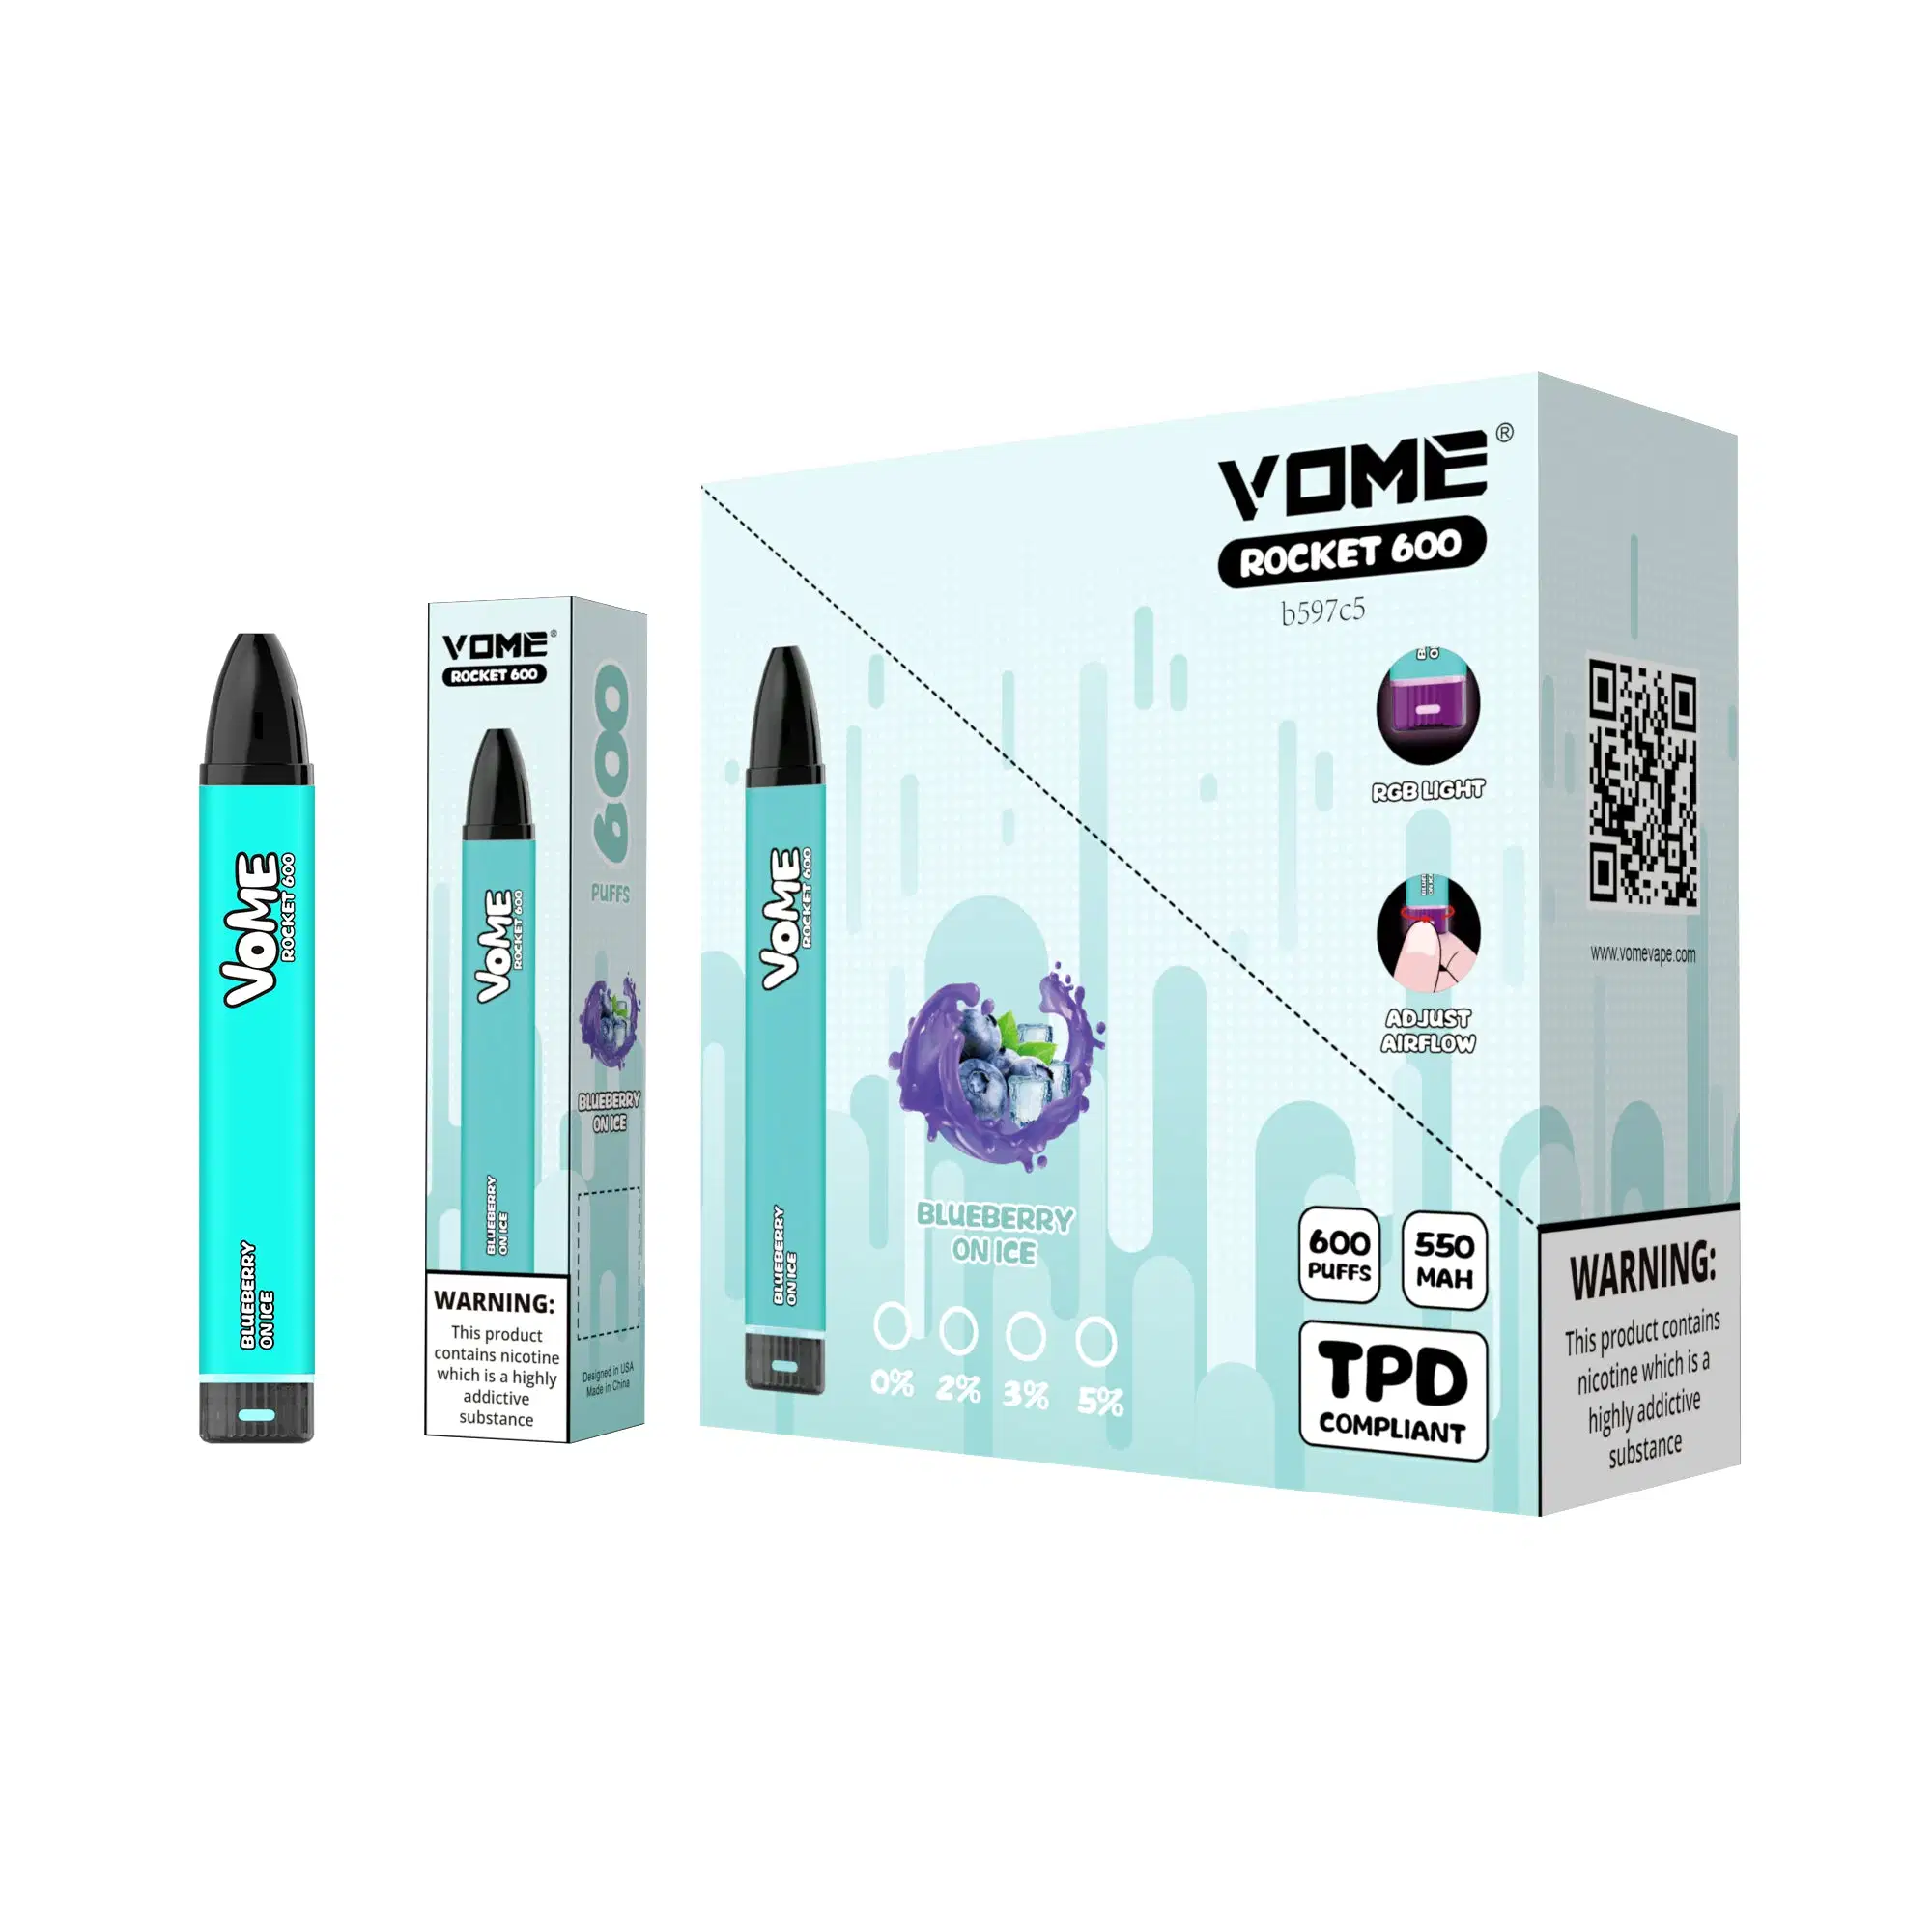 Vome Rocket 600 Puffs Airflow Control Disposable/Chargeable Vape Pod Device Tpd